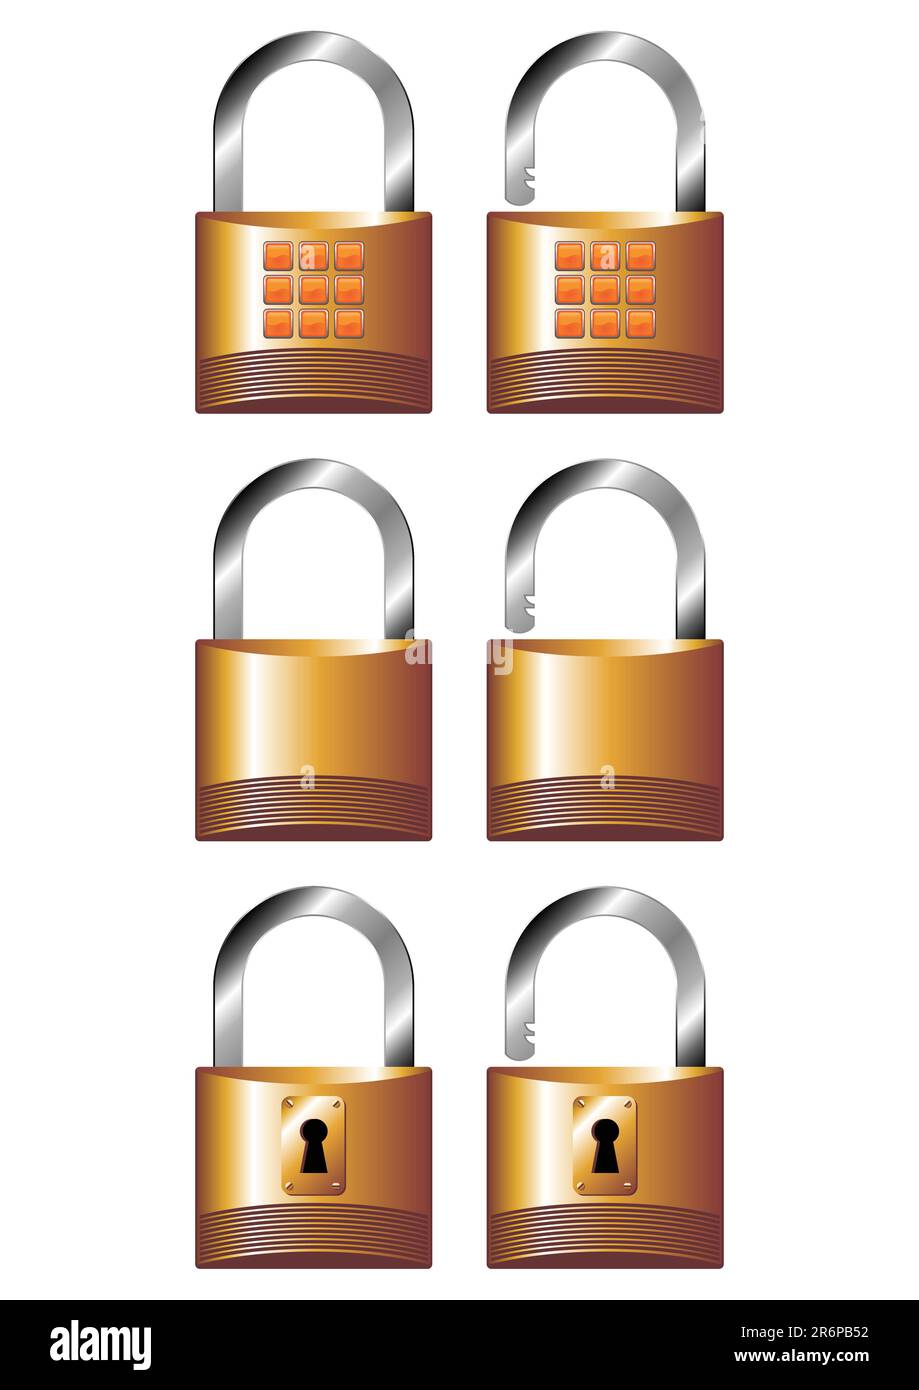 Different opened and closed padlocks over white background Stock Vector